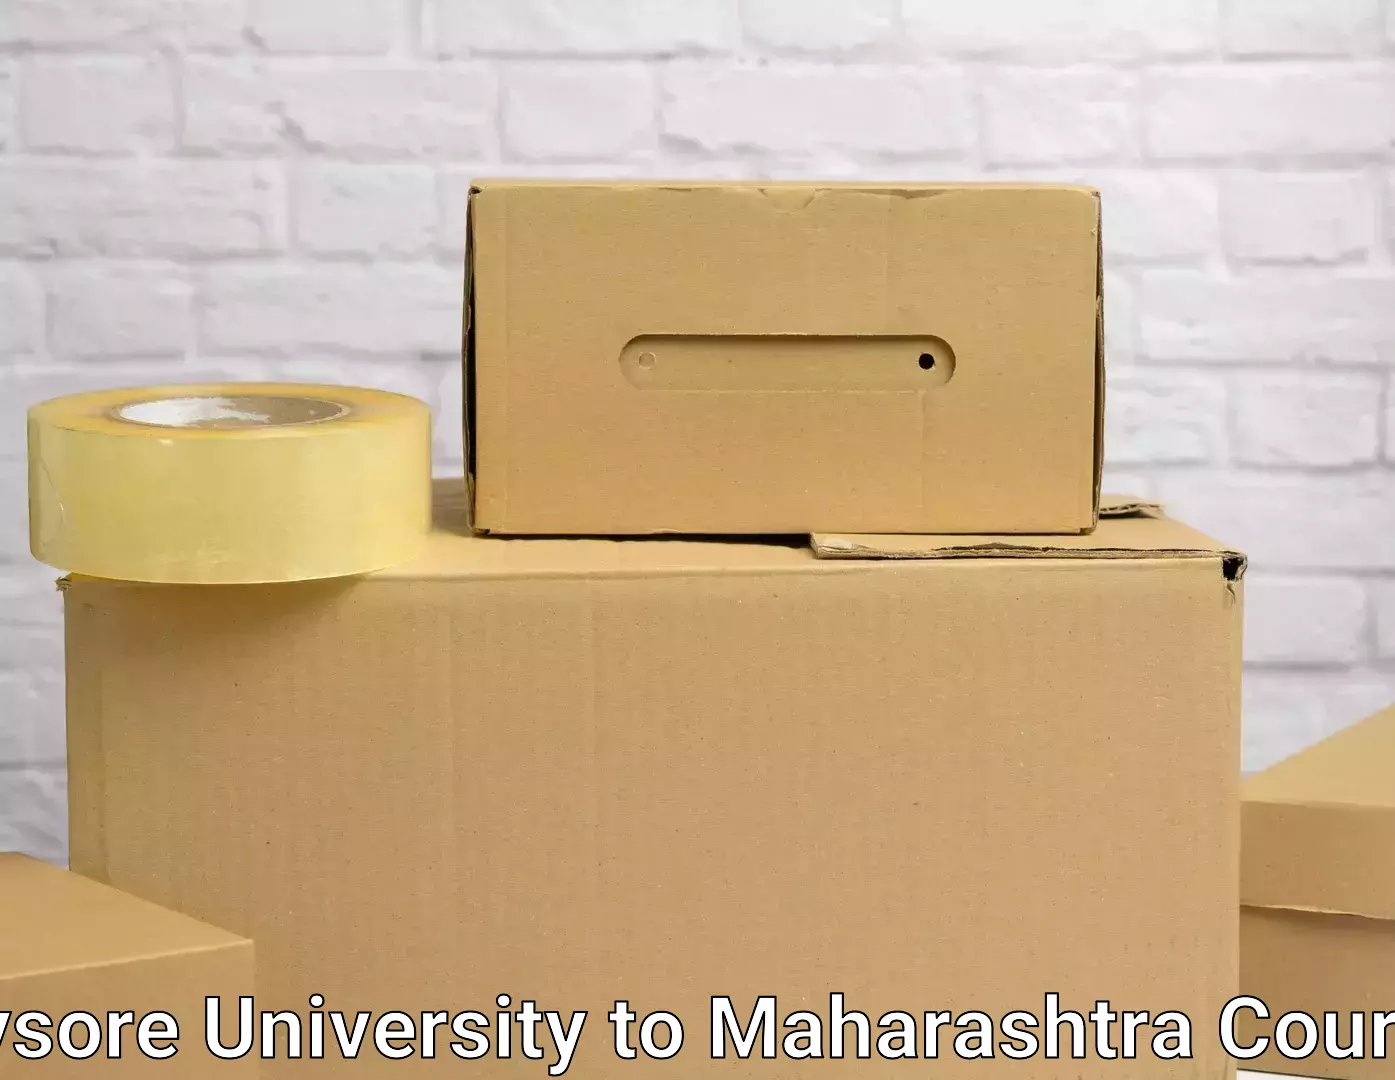 Residential relocation services Mysore University to Virar